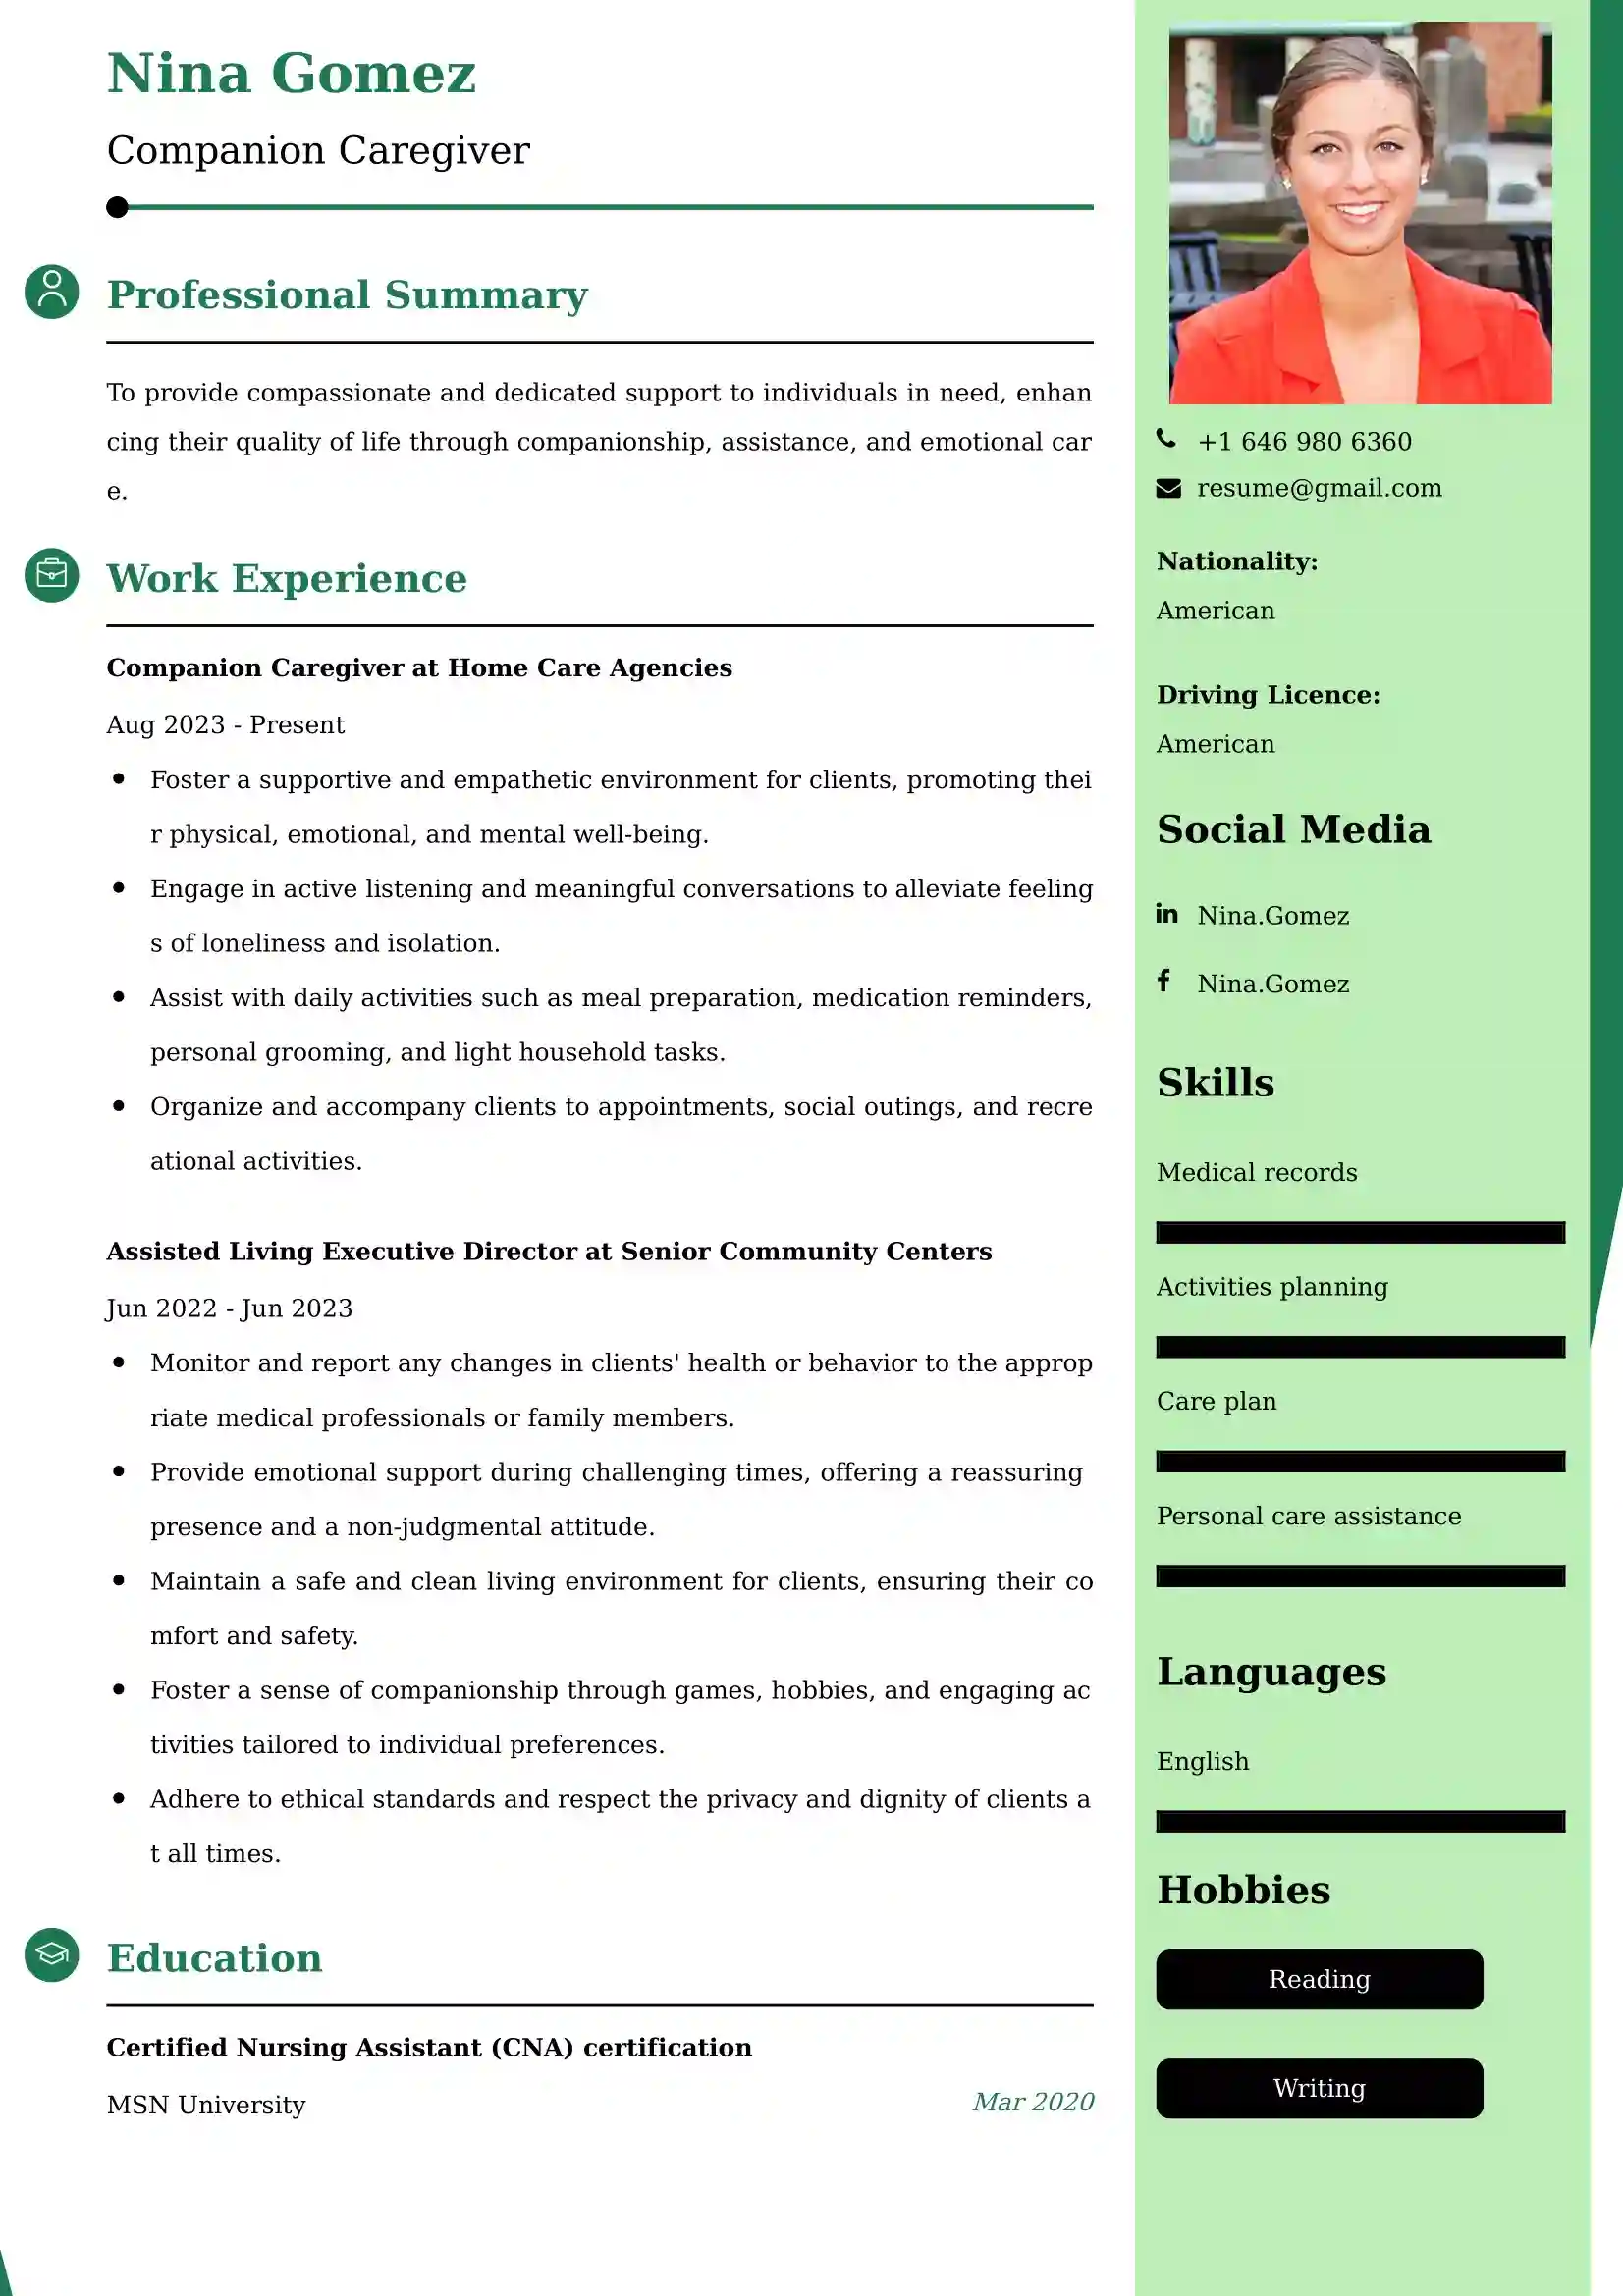 Companion Caregiver Resume Examples - UK Format, Latest Template.